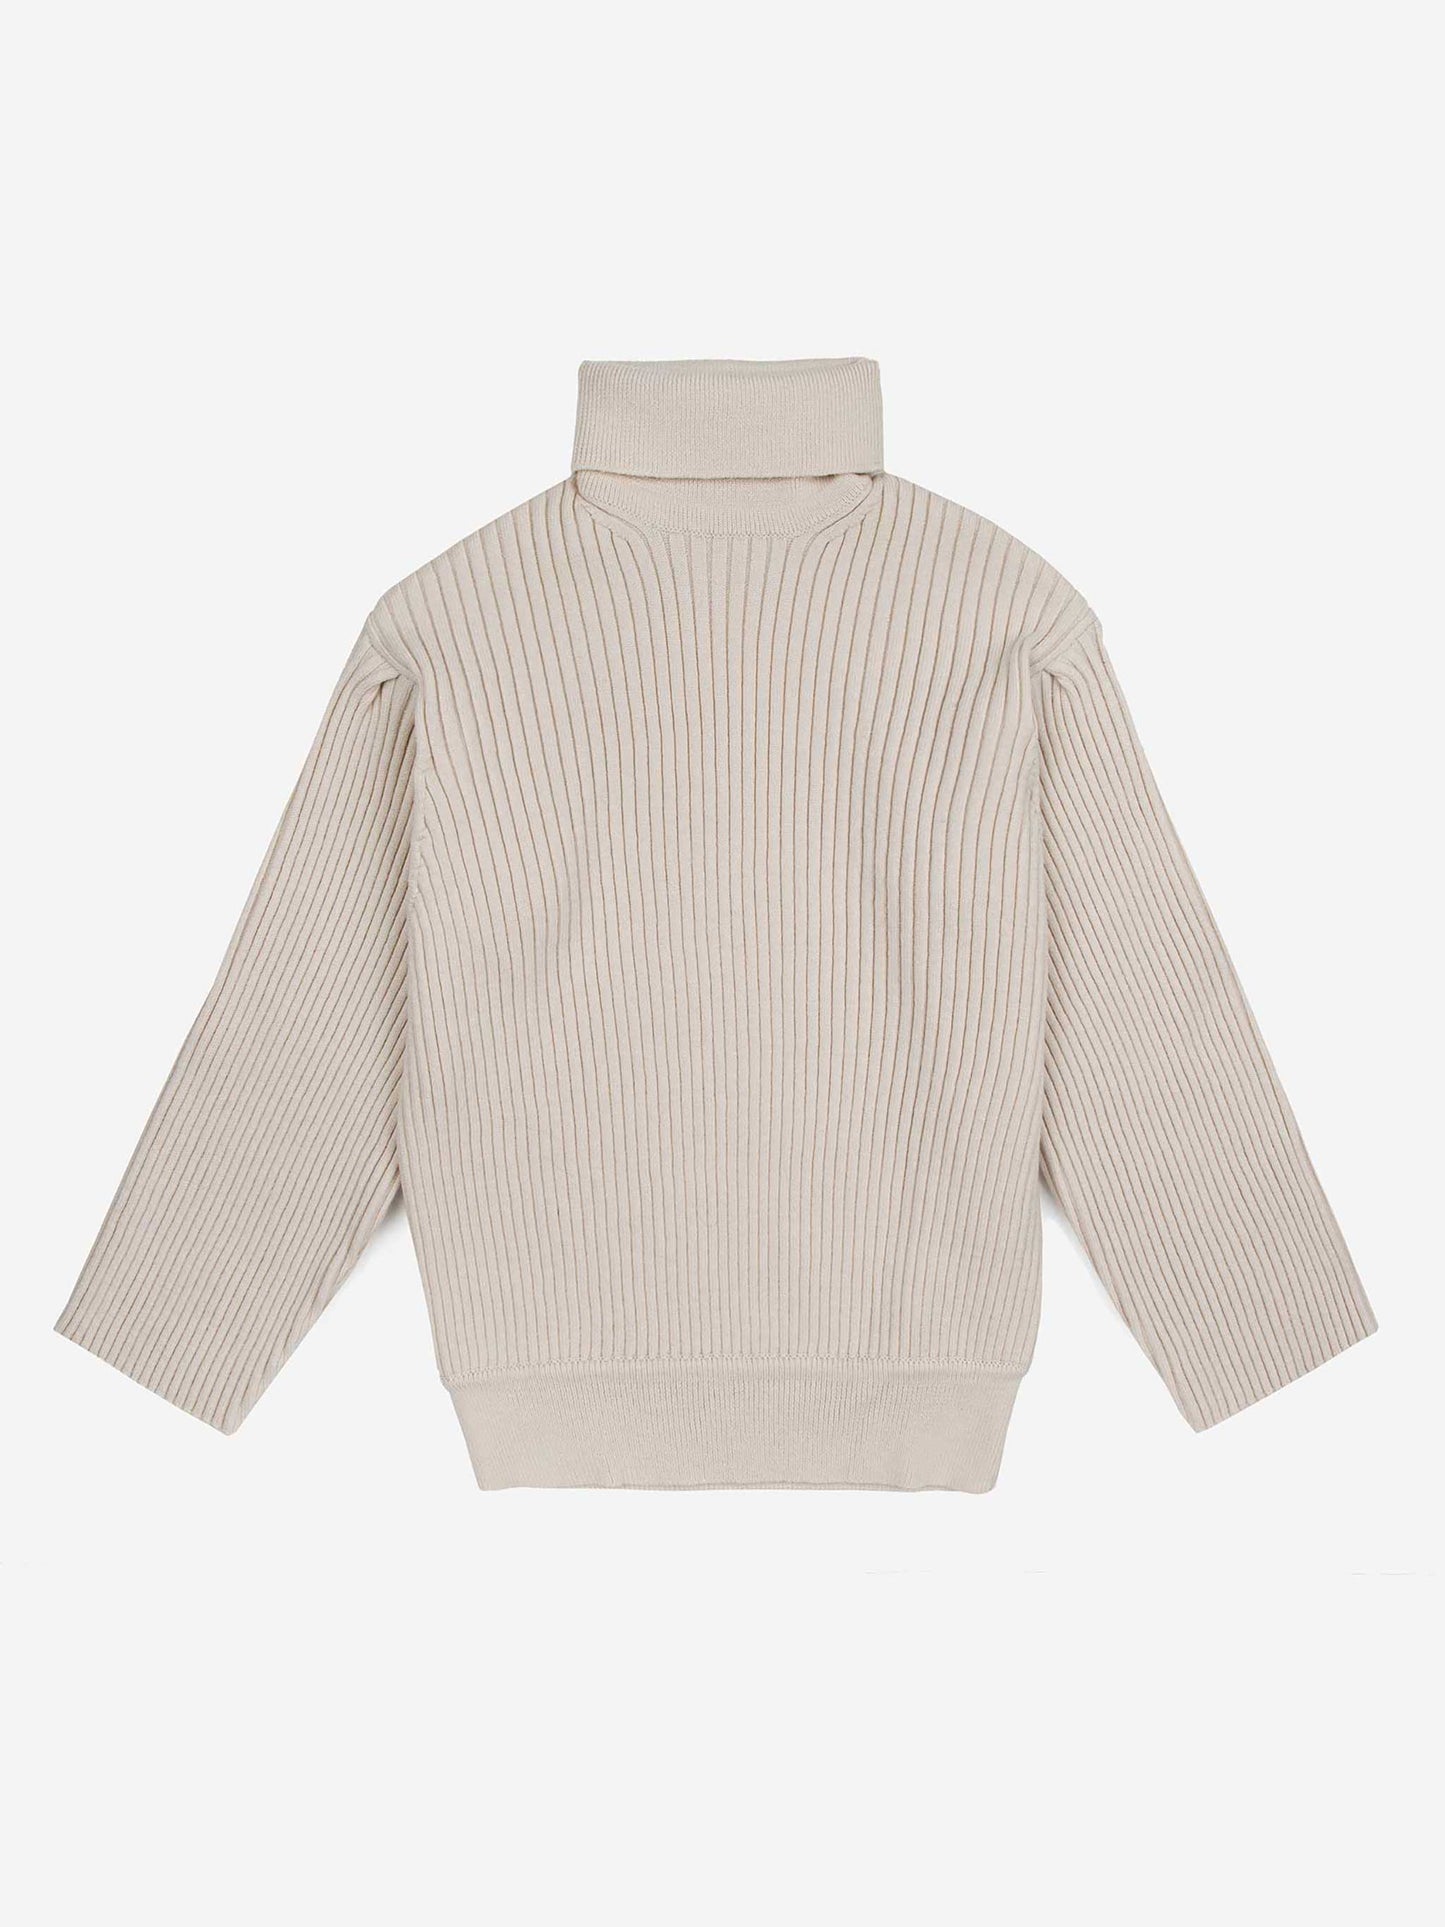 Up Is Down turtle neck jumper